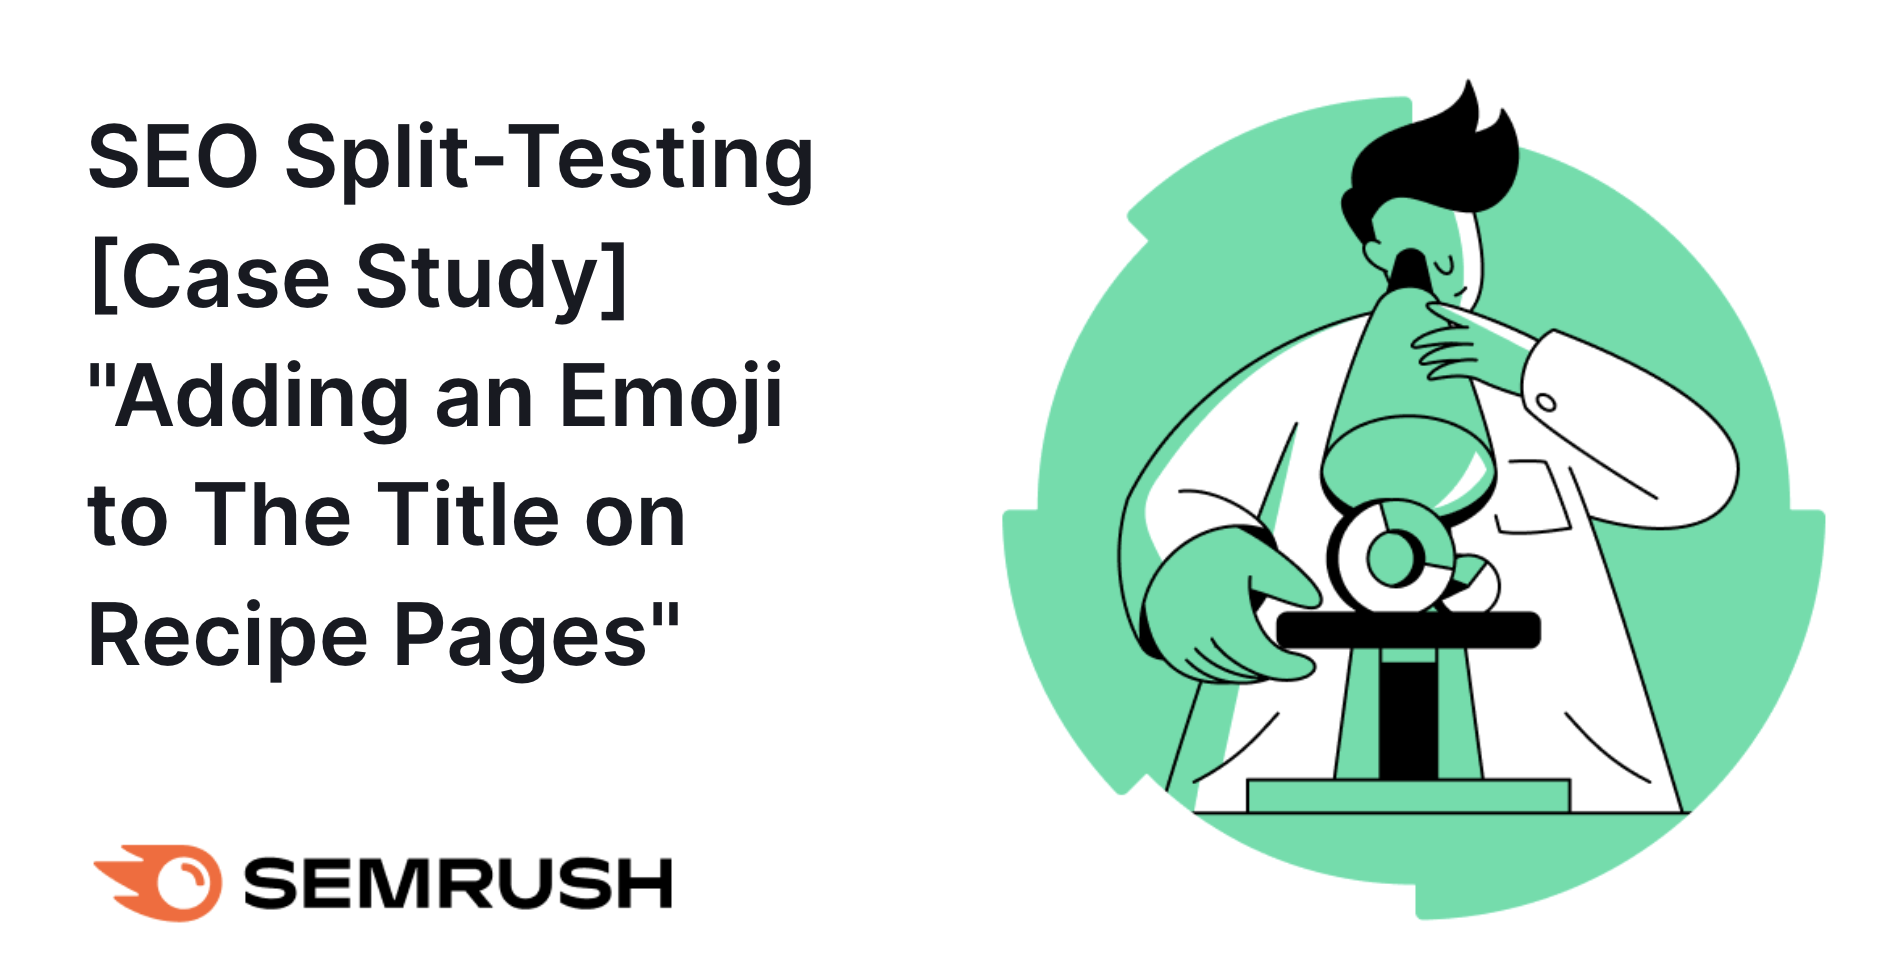 SEO Split-Testing [Case Study T002] “Adding an Emoji to The Title on Recipe Pages“